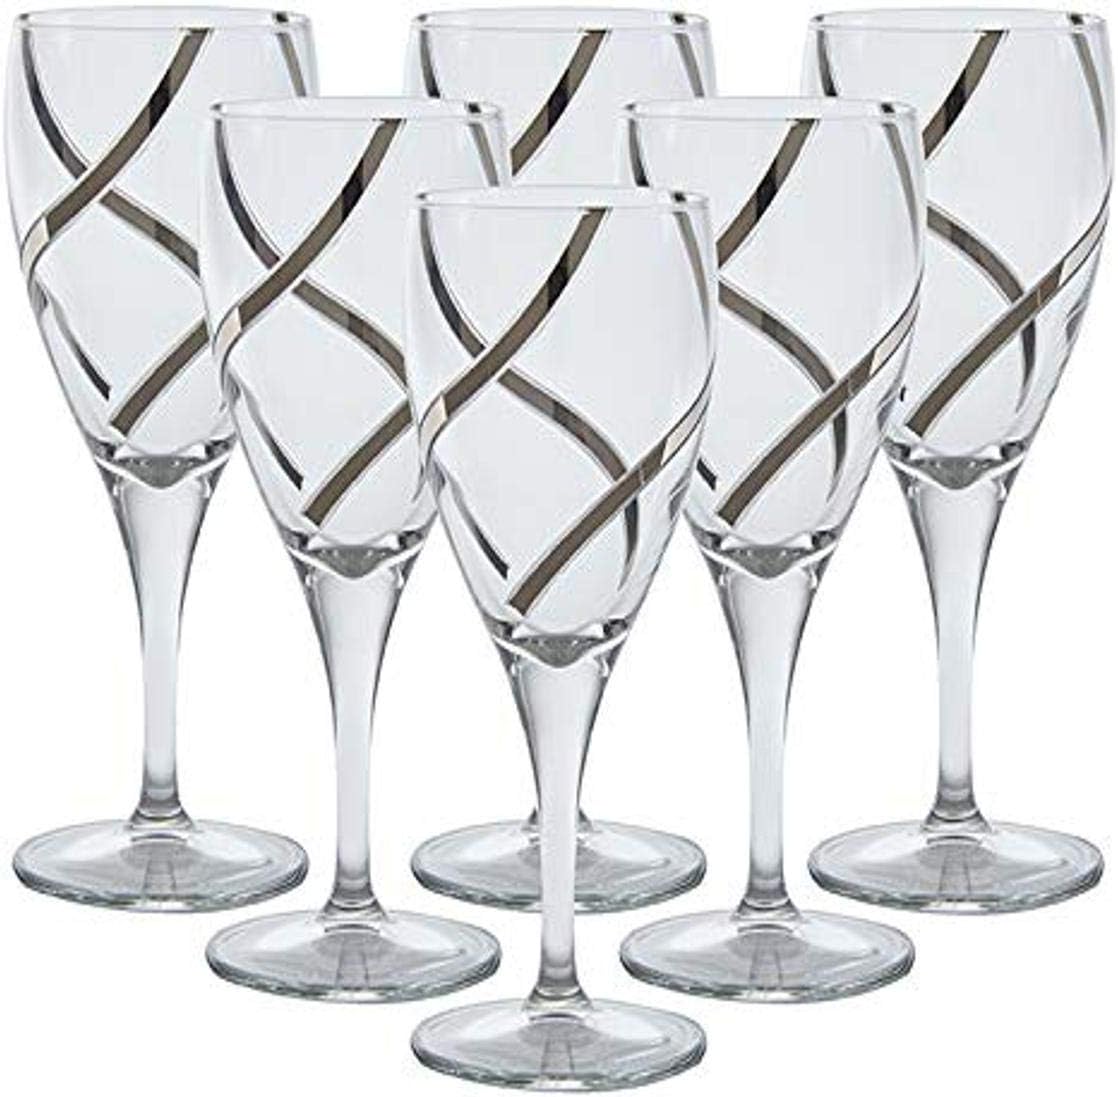 Glazze Crystal VNG-080-PL Red Wine Glasses Set | Hand-Cut with an Interwoven 24K Platinum Detailing Throughout | Stunning Stemware Designed to Perfection | Set of 6, 8.5\\\" Tall 10 oz capacity